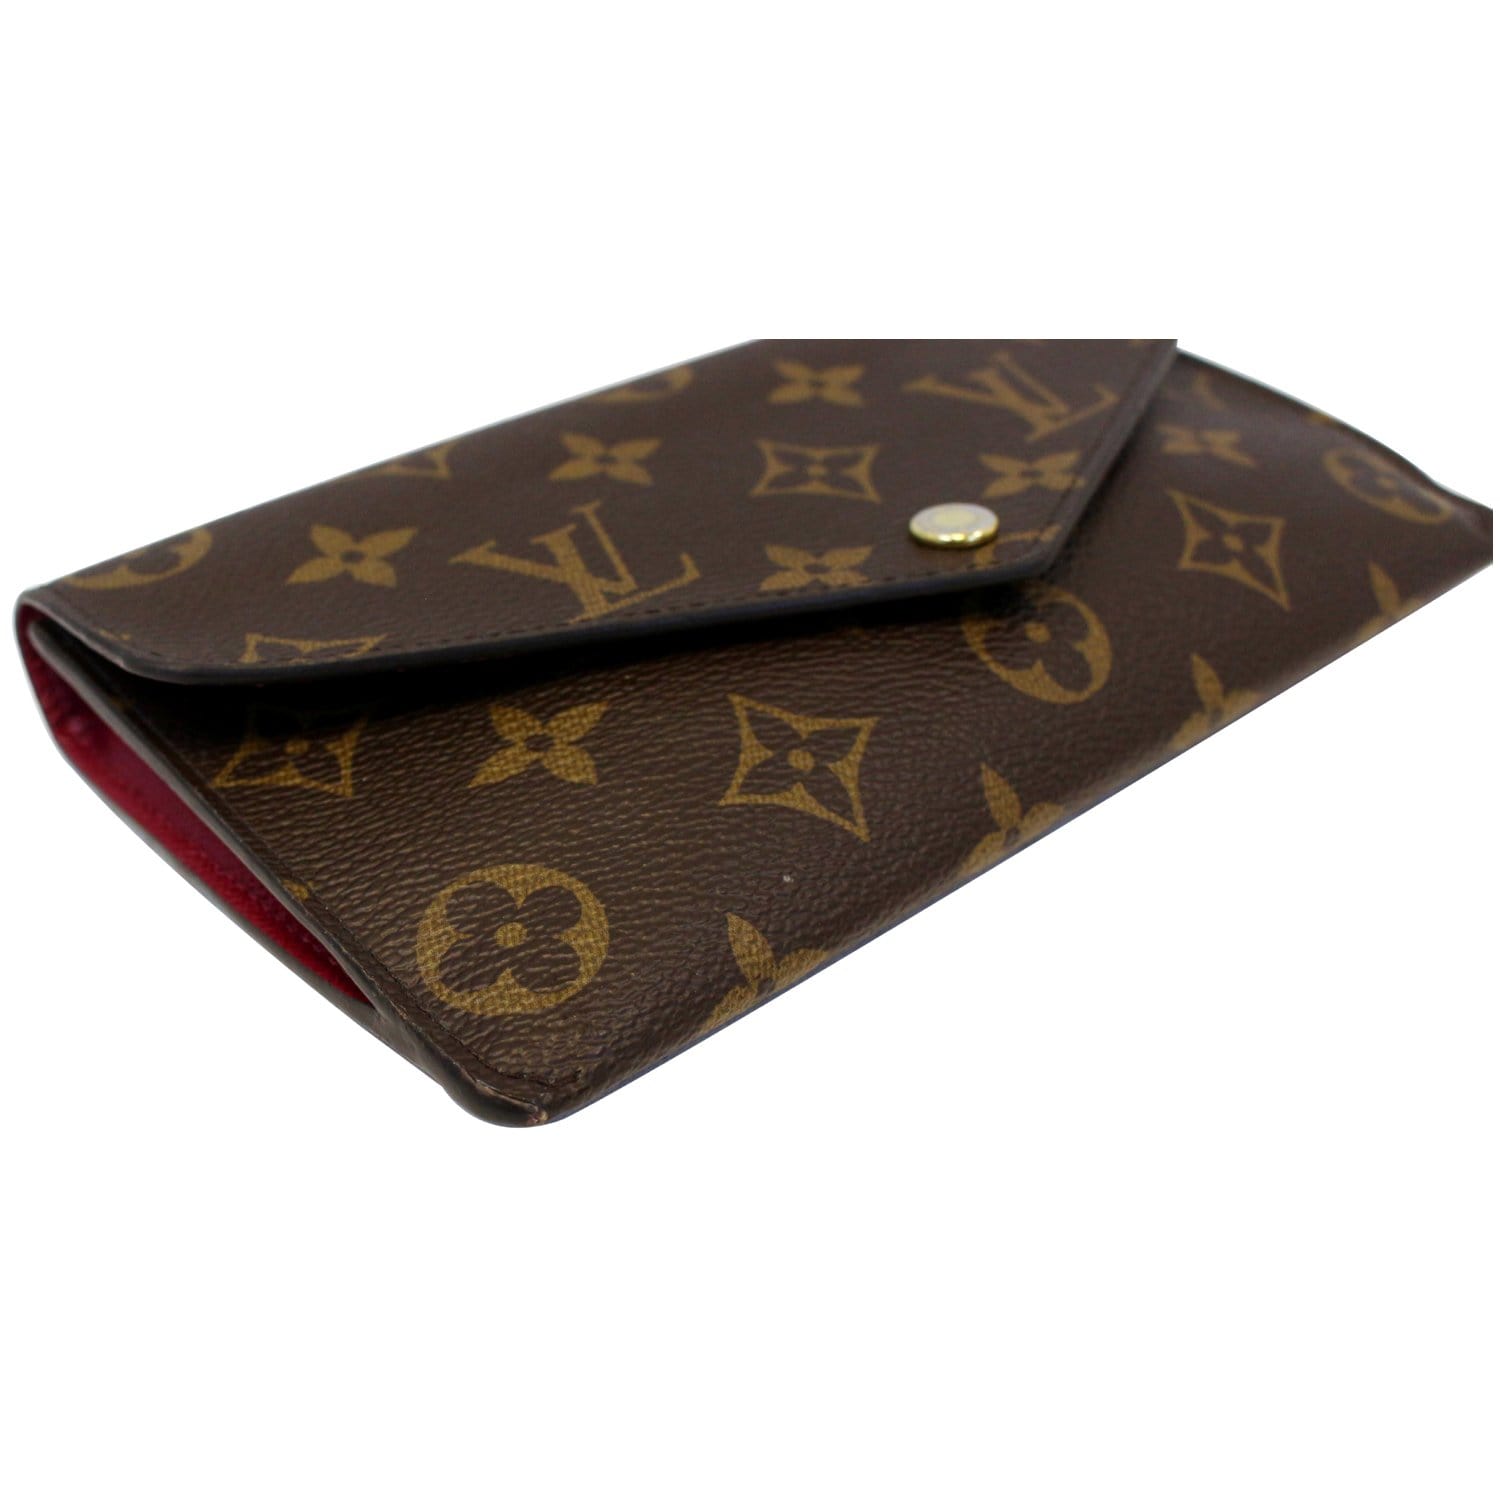 Louis Vuitton Sarah Wallet in Monogram and Fuchsia. LOVE how neat